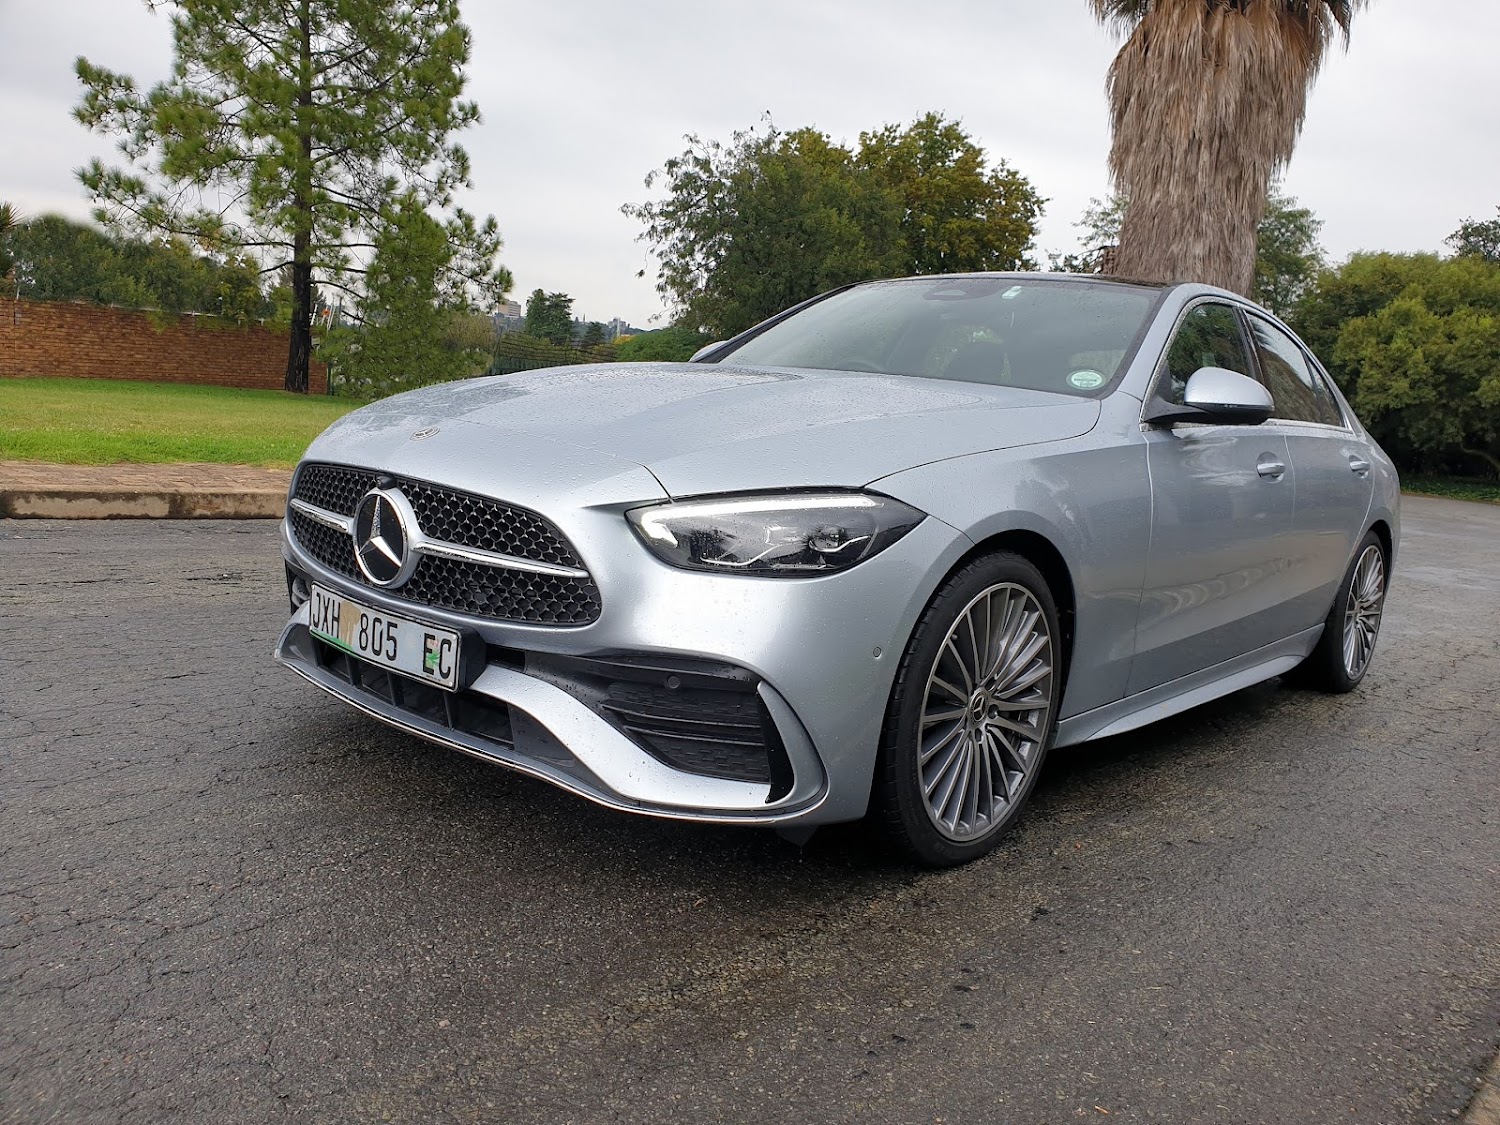 2022 Mercedes Benz C Class W206 AMG Line🔥Real-life Review 